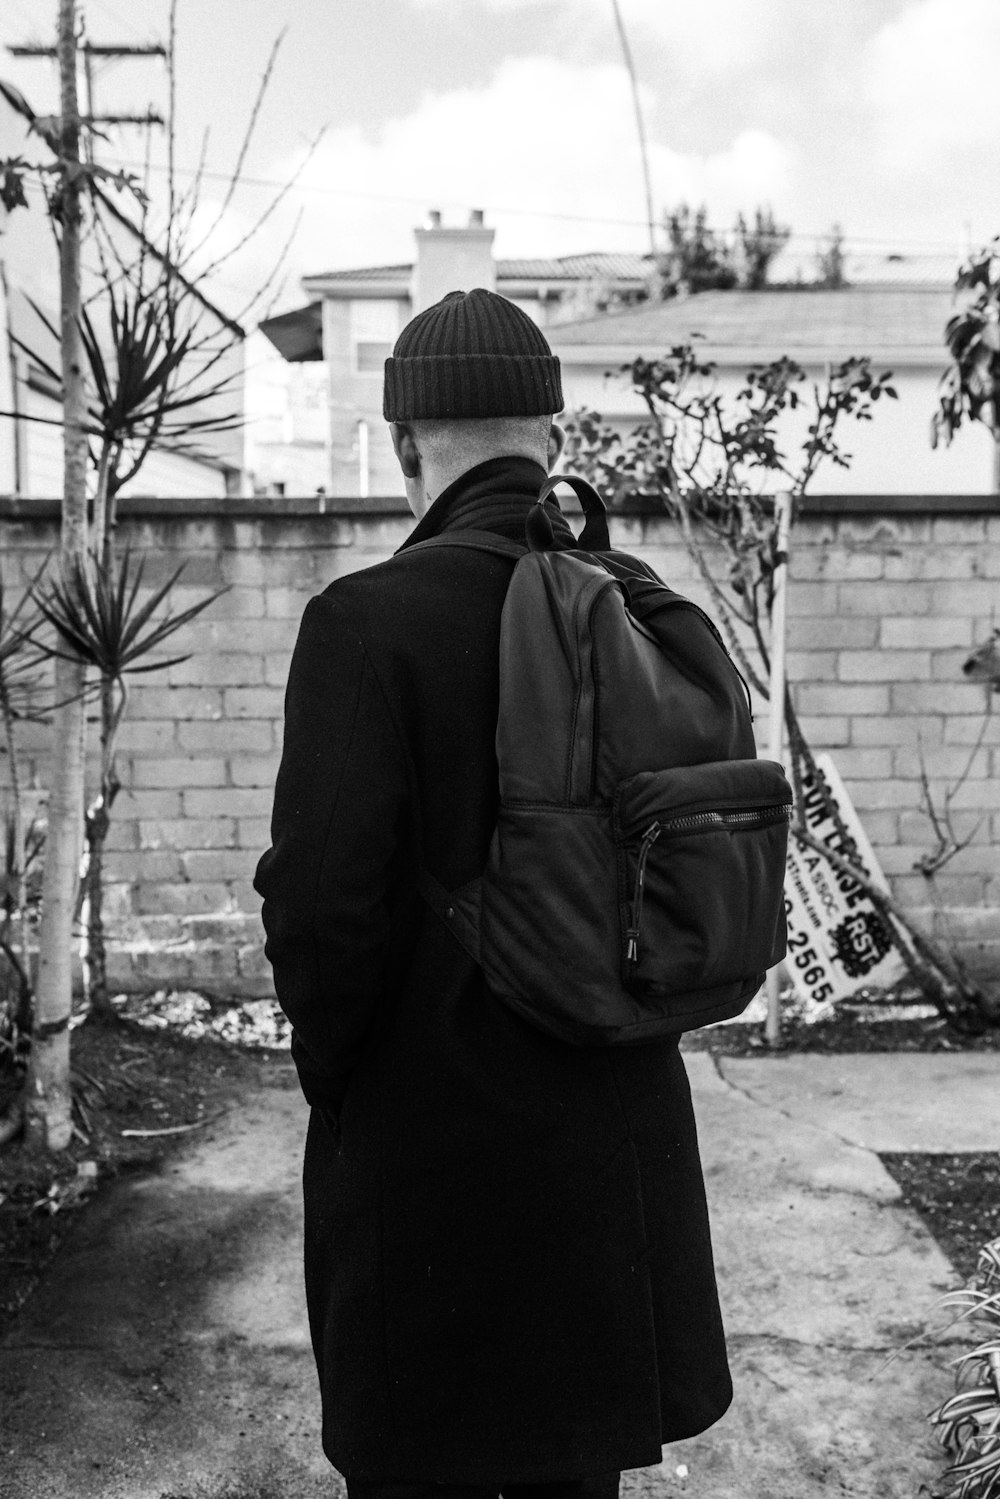 grayscale photo of man in black jacket and knit cap standing near wall